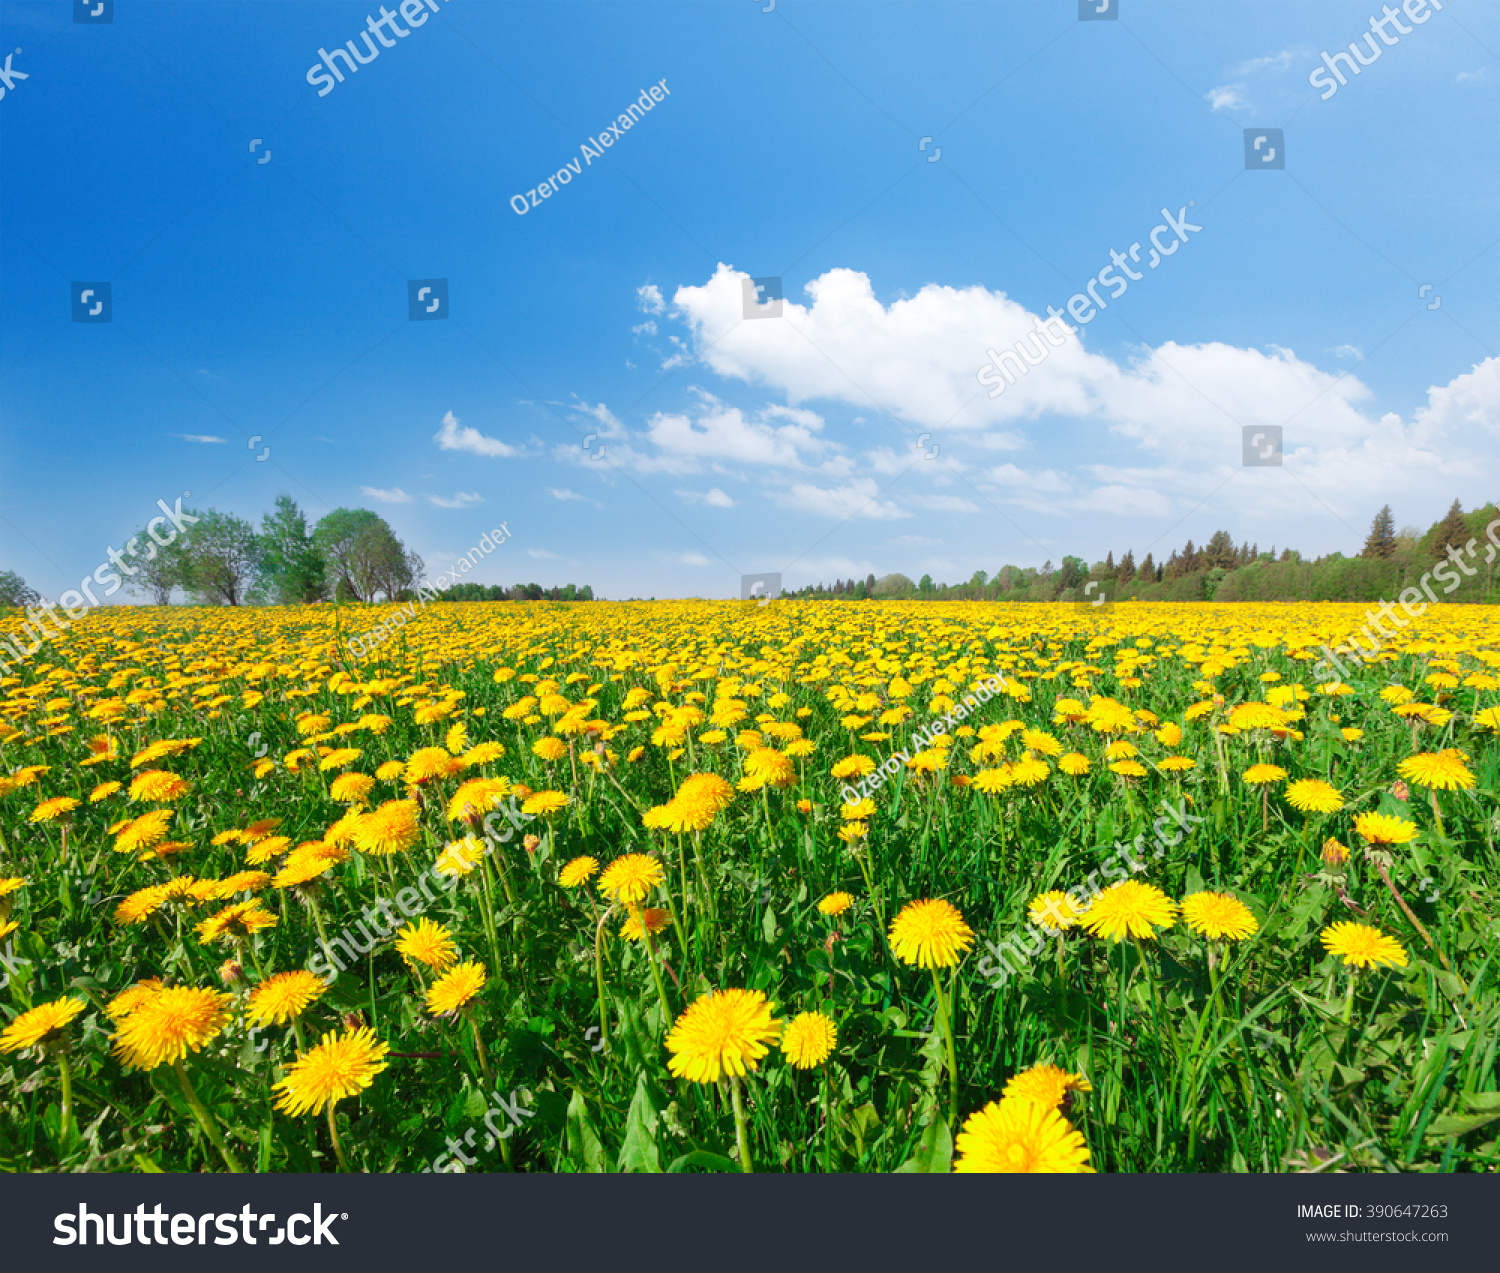 Yellow Flowers Field Under Blue Cloudy Sky Stock Photo 390647263